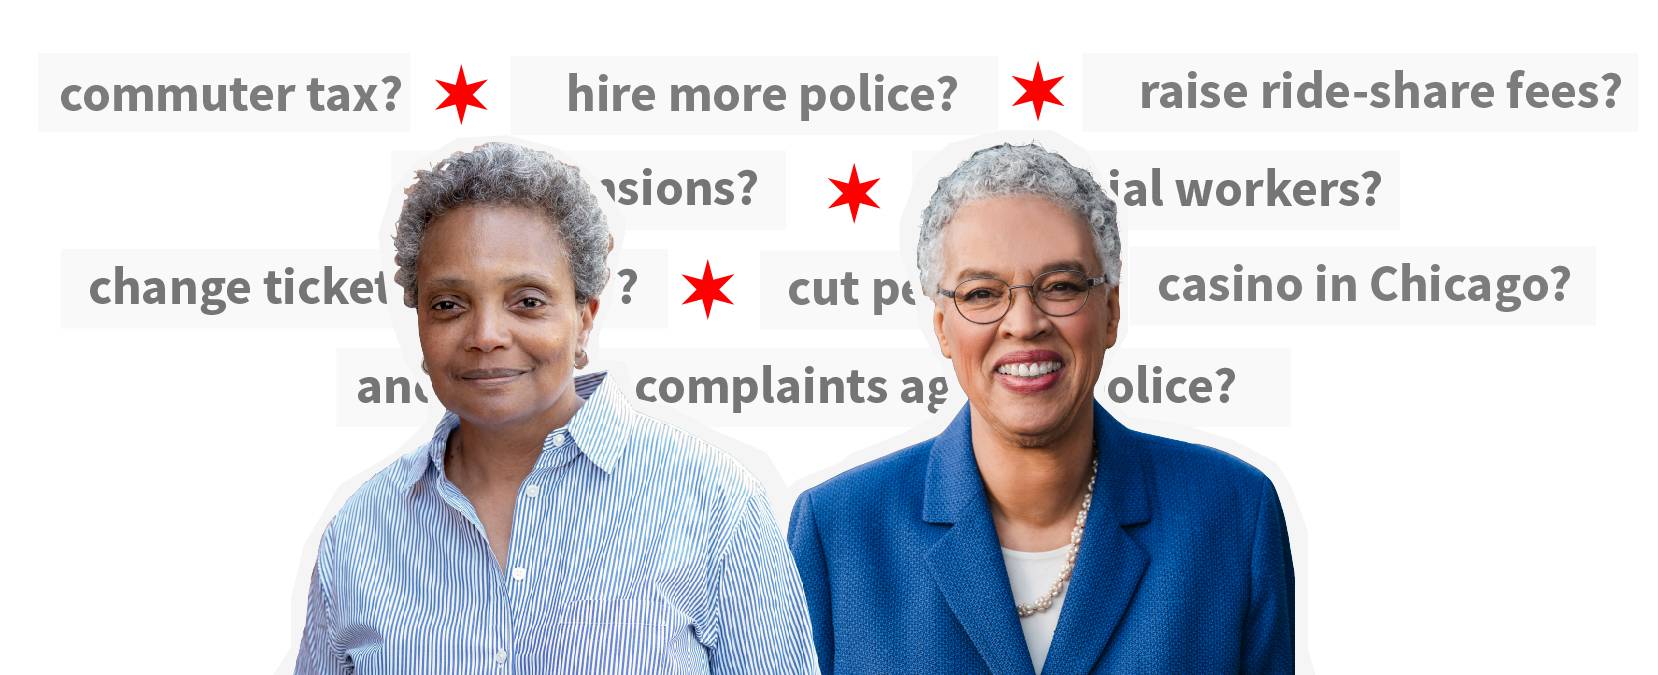 Cutout photographs of Lori Lightfoot and Toni Preckwinkle against a backdrop of questions.